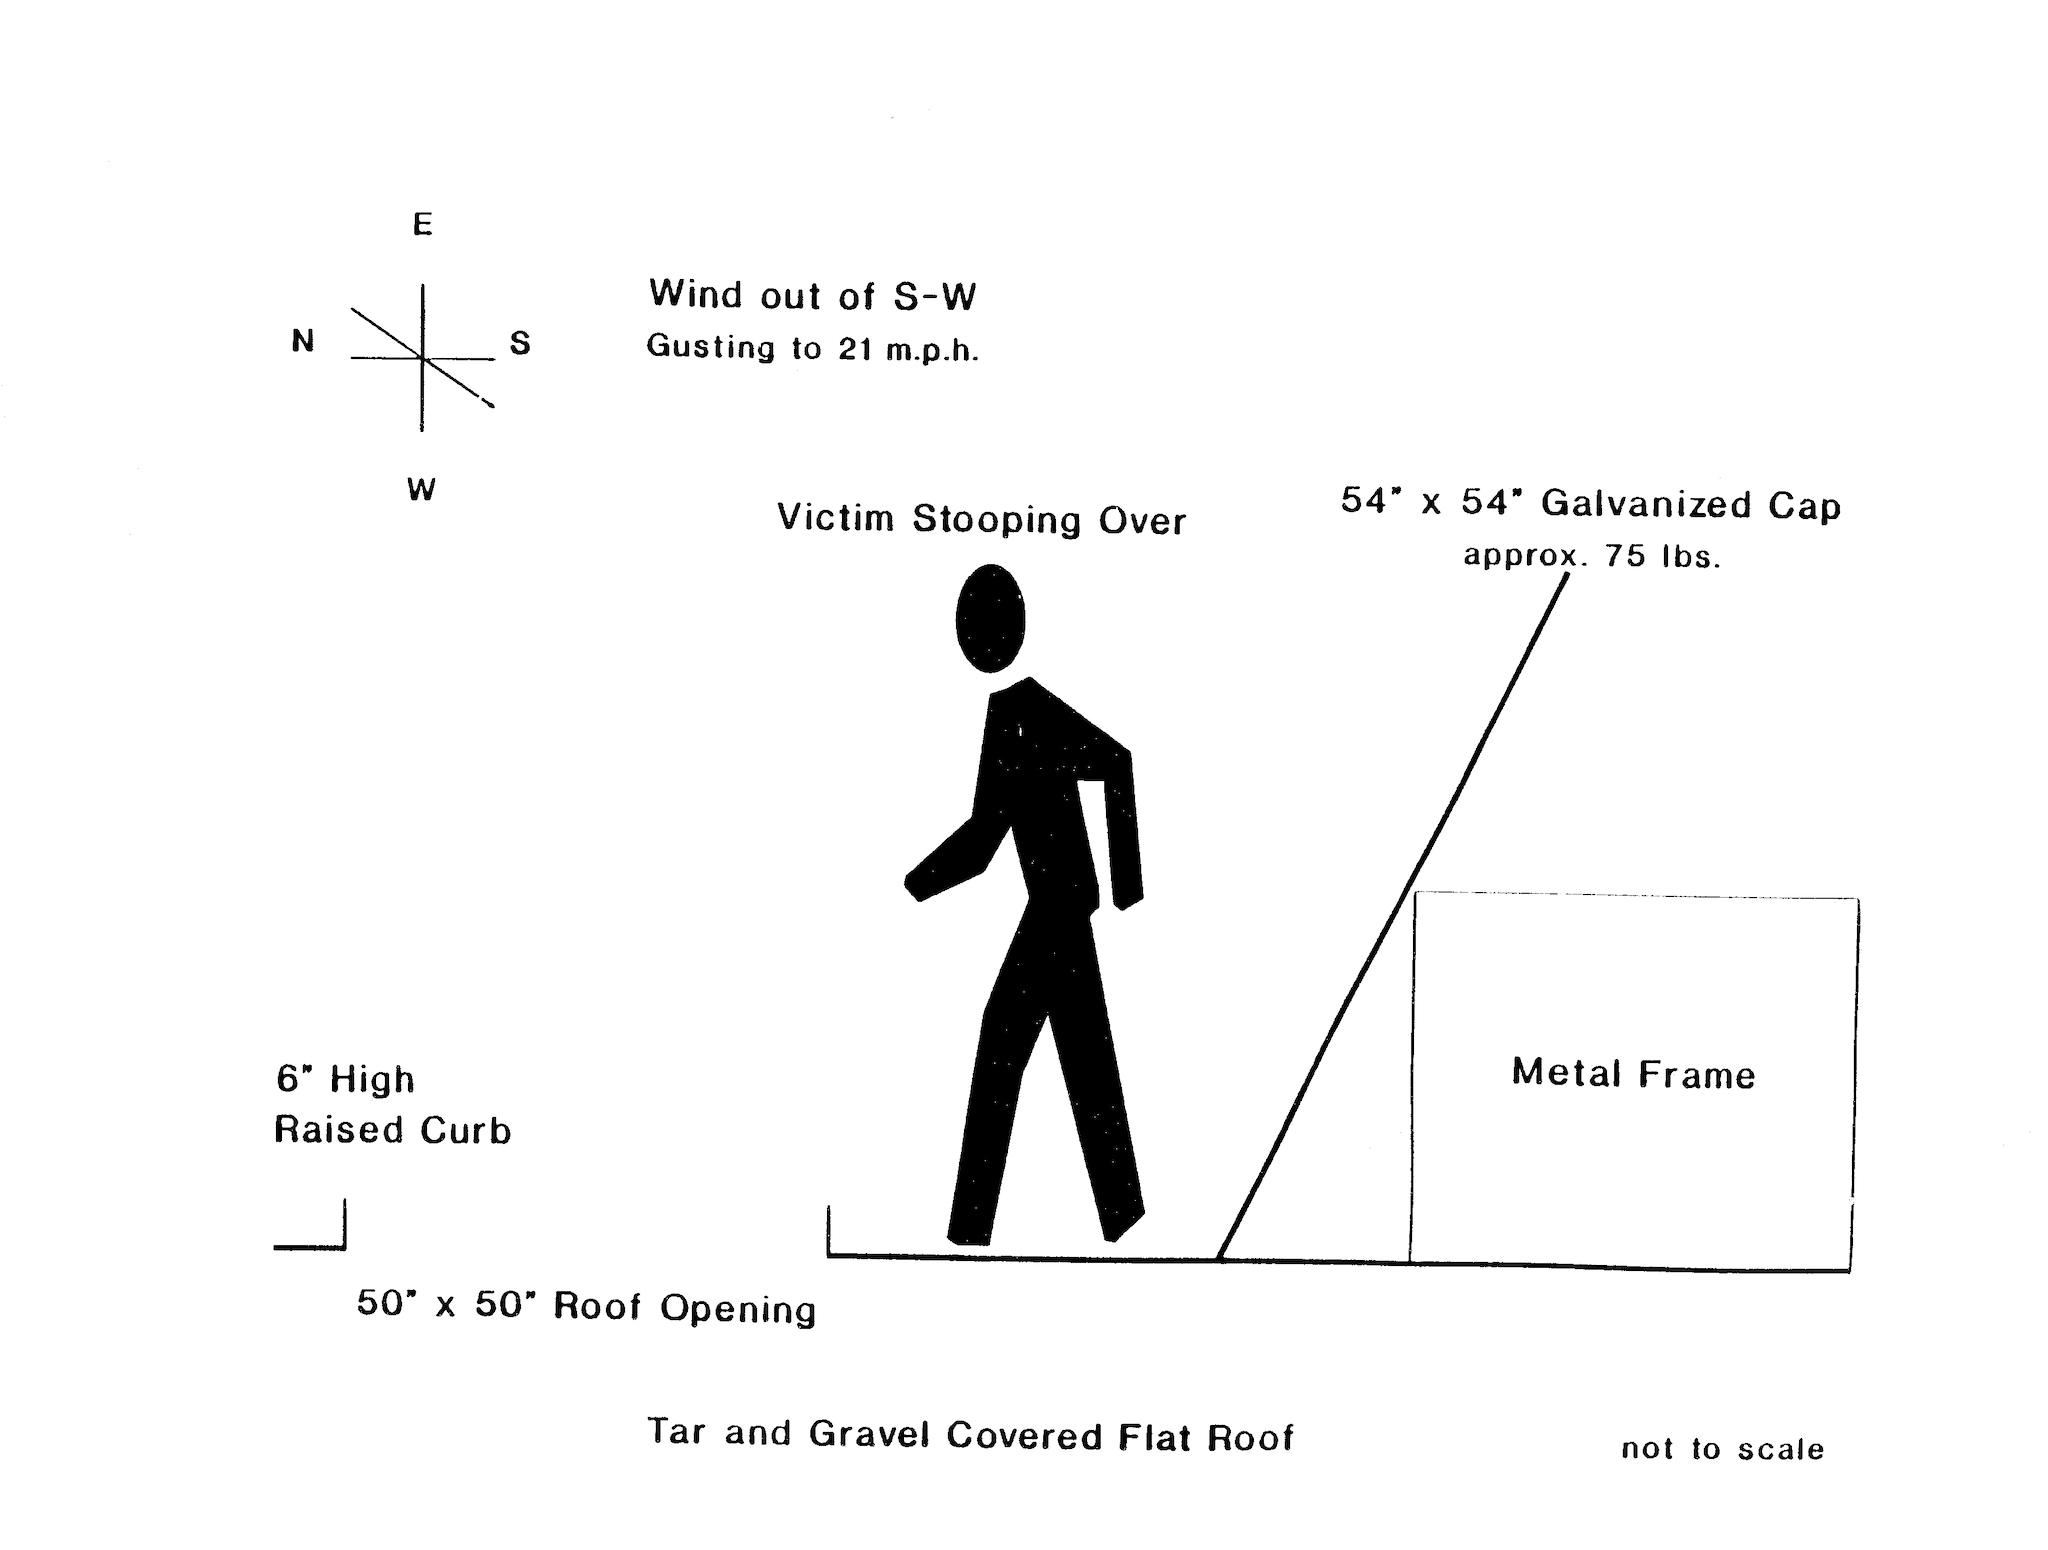 drawing of the tar and gravel covered flat roof